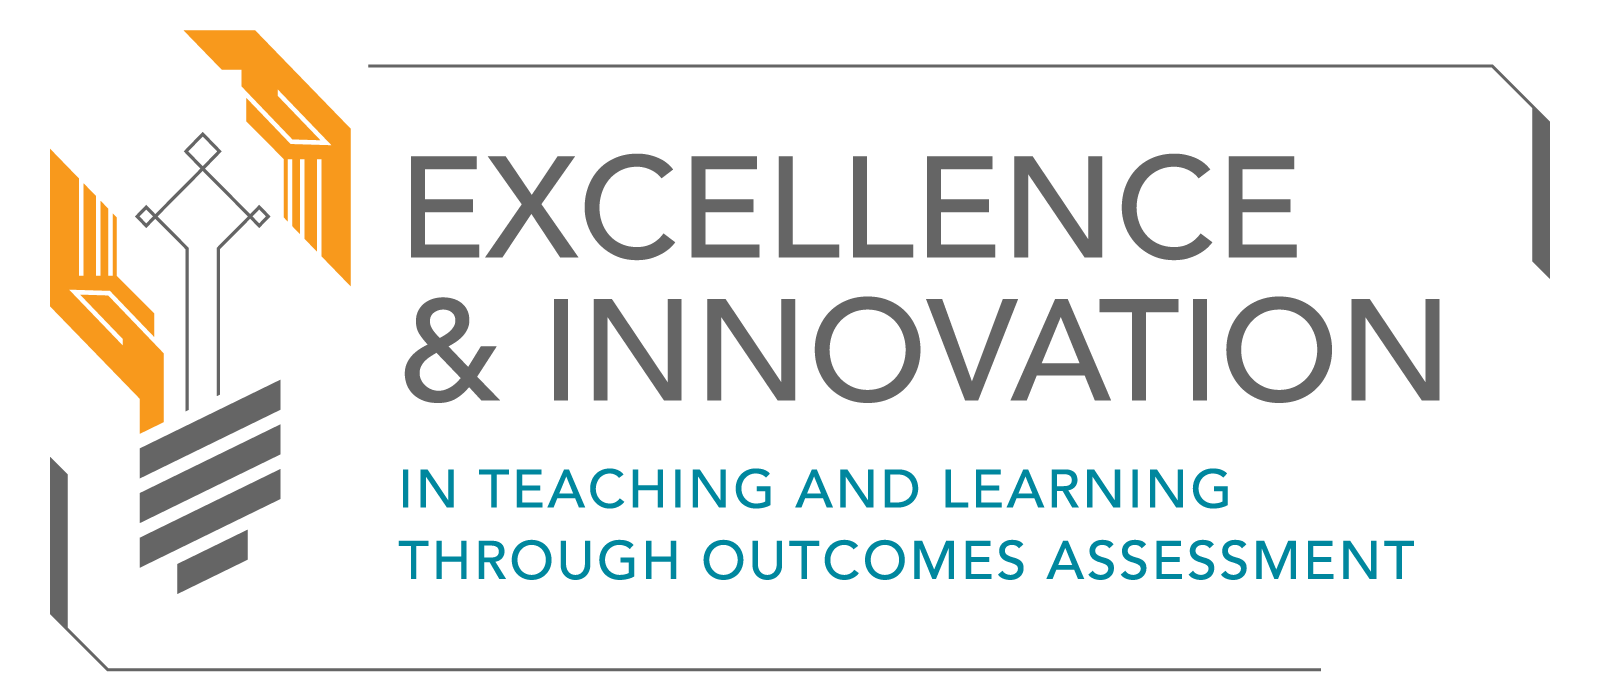 Excellence and Innovation in Teaching Through Outcomes Logo